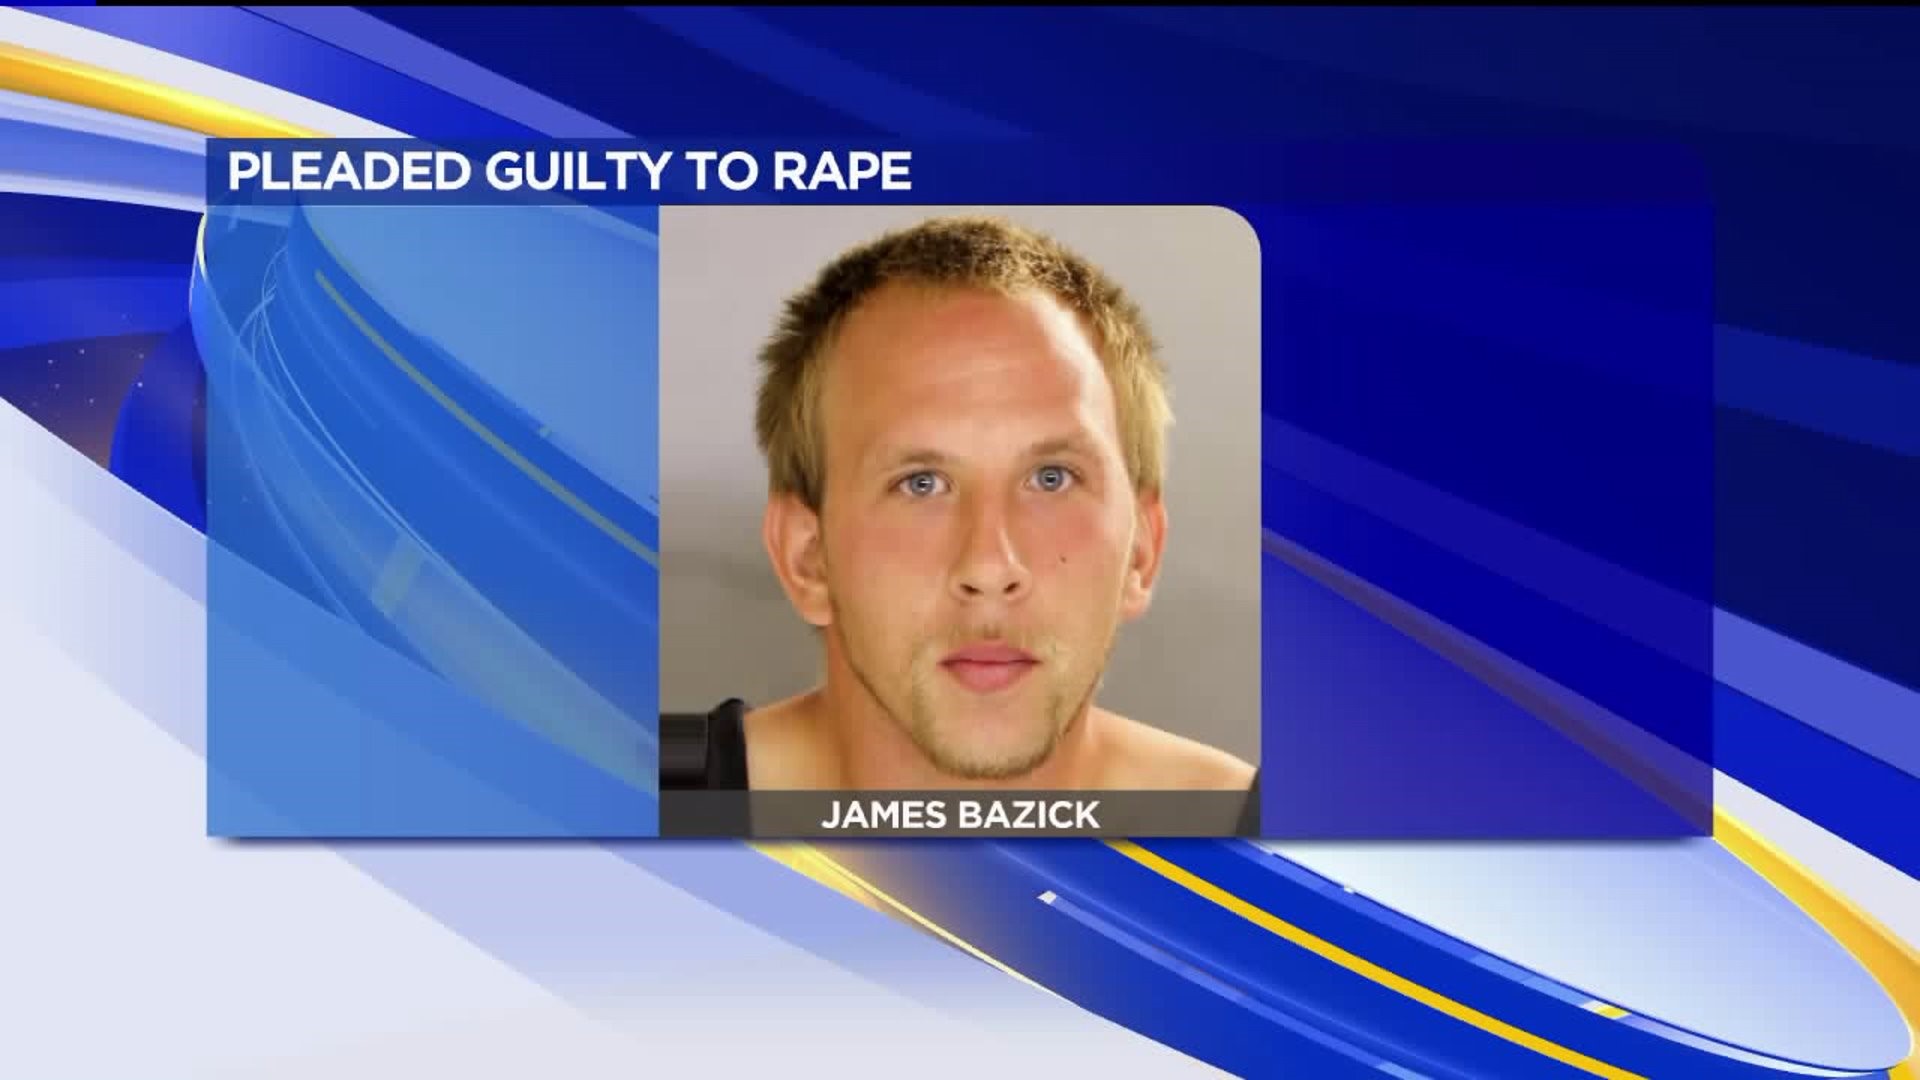 Man Pleads Guilty to Raping 11-year-old Girl